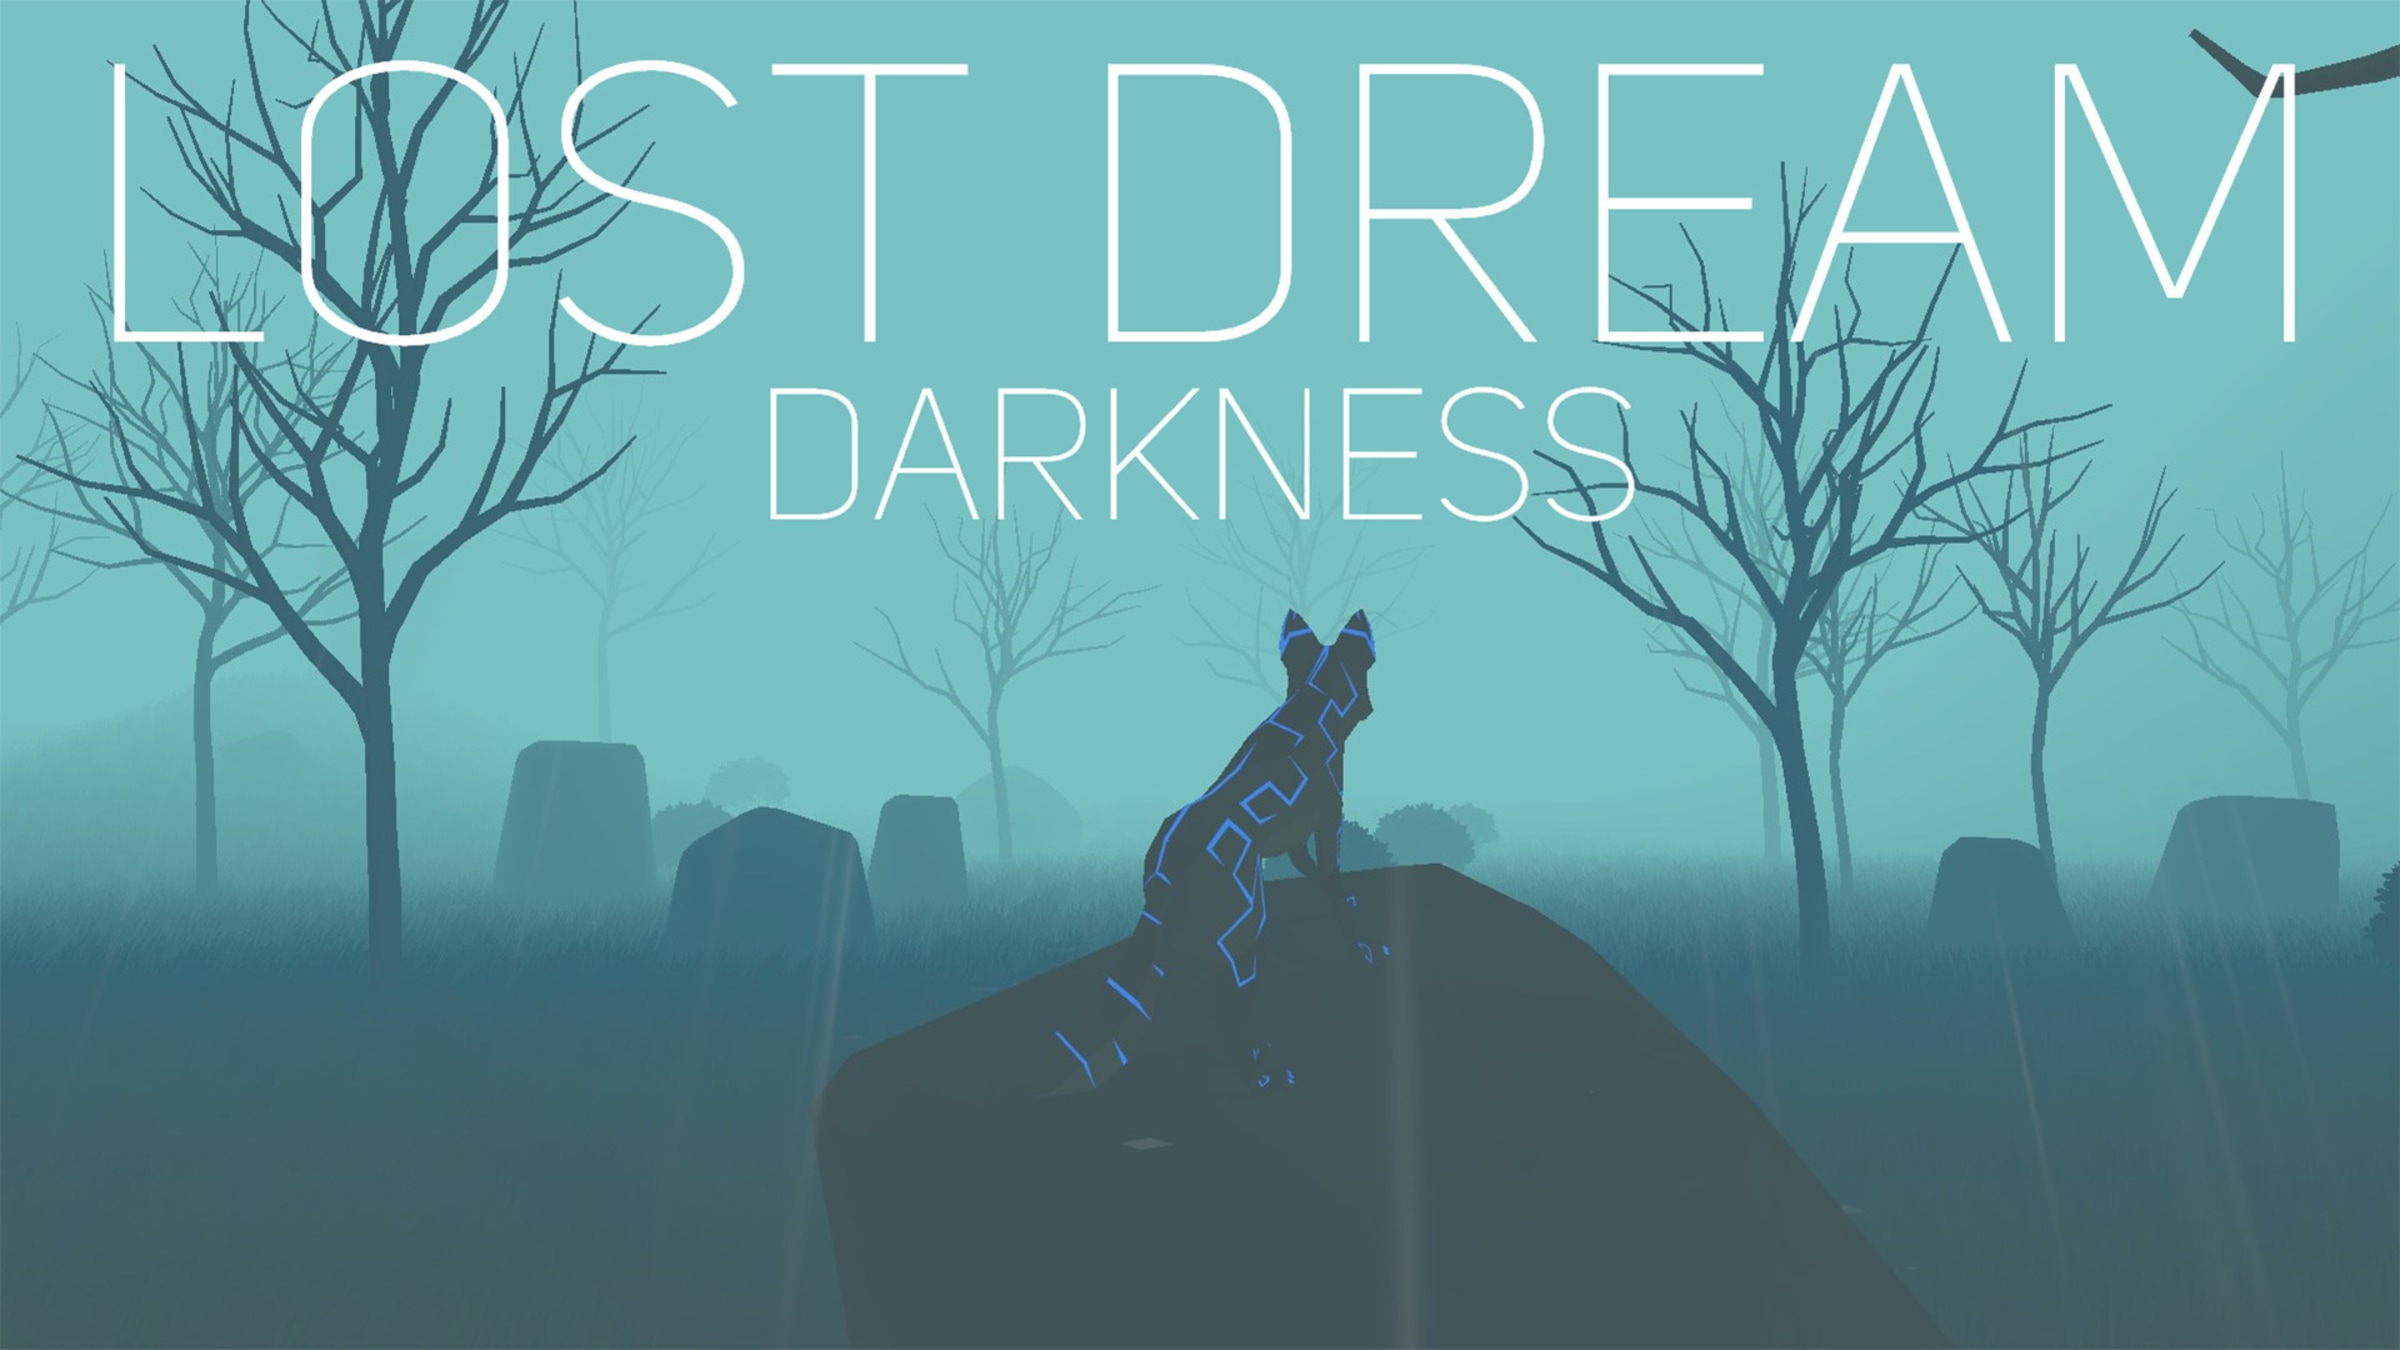 Lost Dream. Ирис Lost in Dreams. Дроны убийцы знак лост Дреам. Jaratairerpg. Lost in darkness